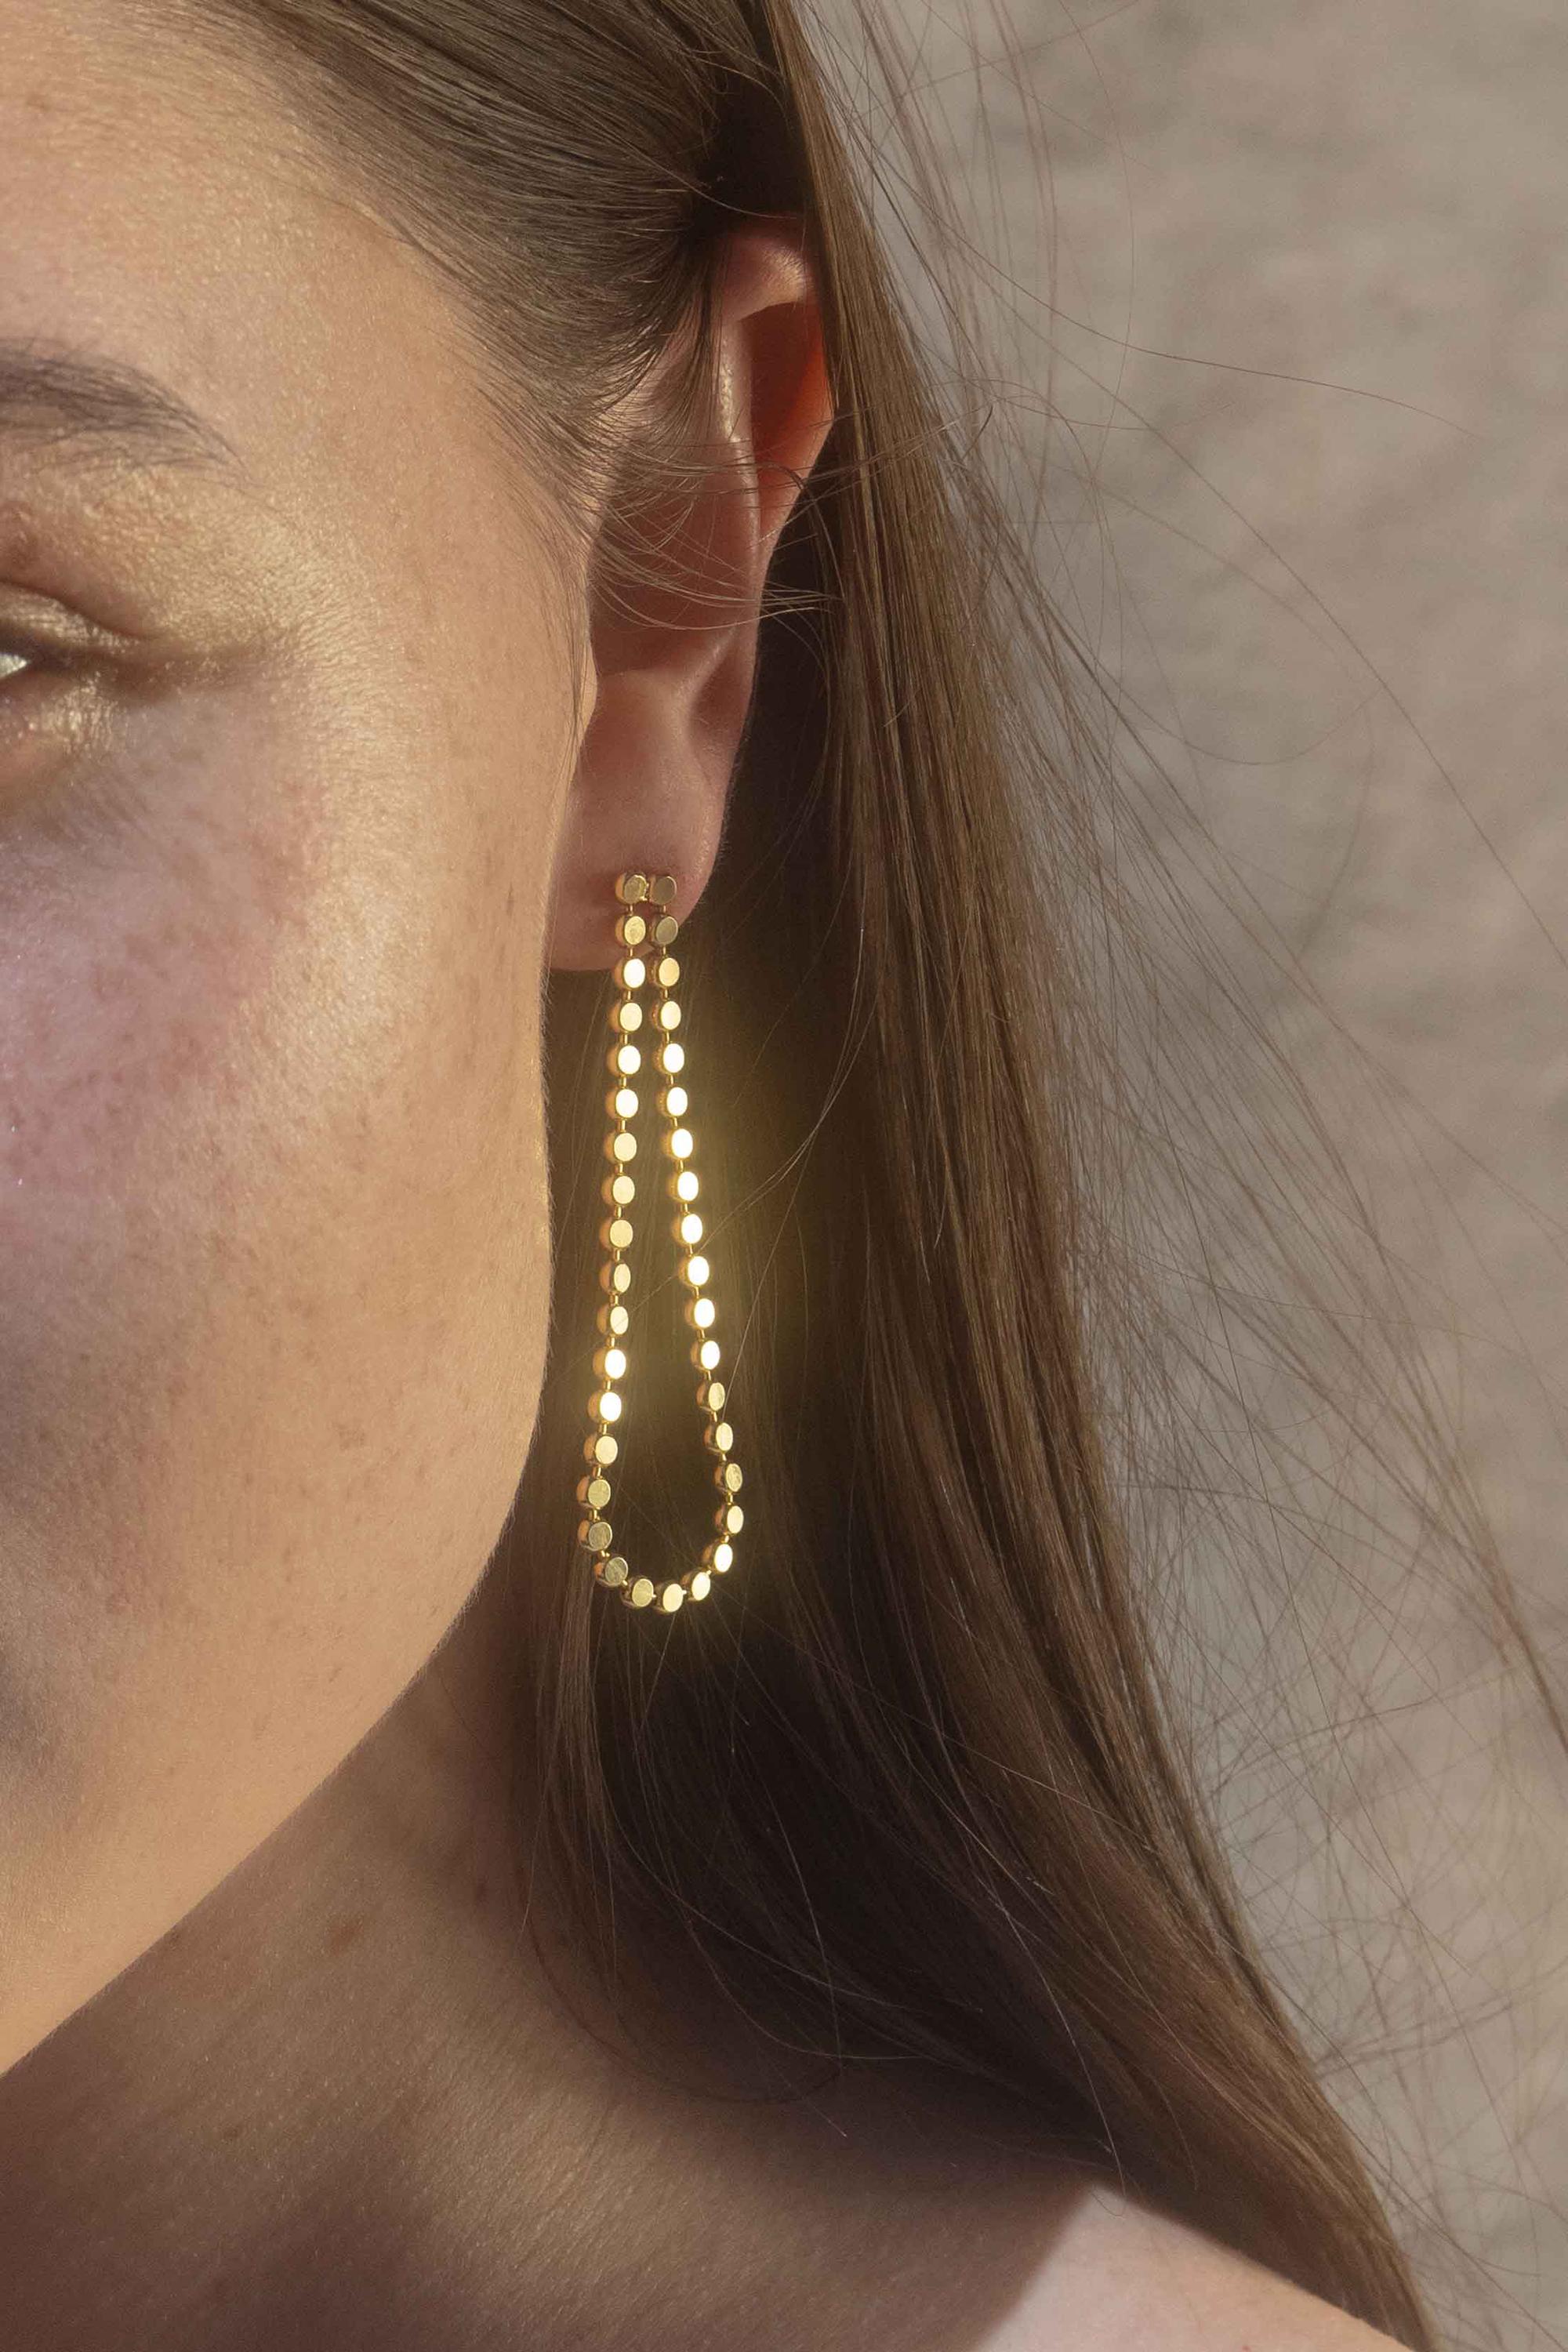 Alegria single Drop ( only front)

These 18k gold plated  earrings are available in 4 different ways.( exaple in pictures). The price listed is for the single  one. Wear just the front for an easy everyday look or add the back drop and dress to